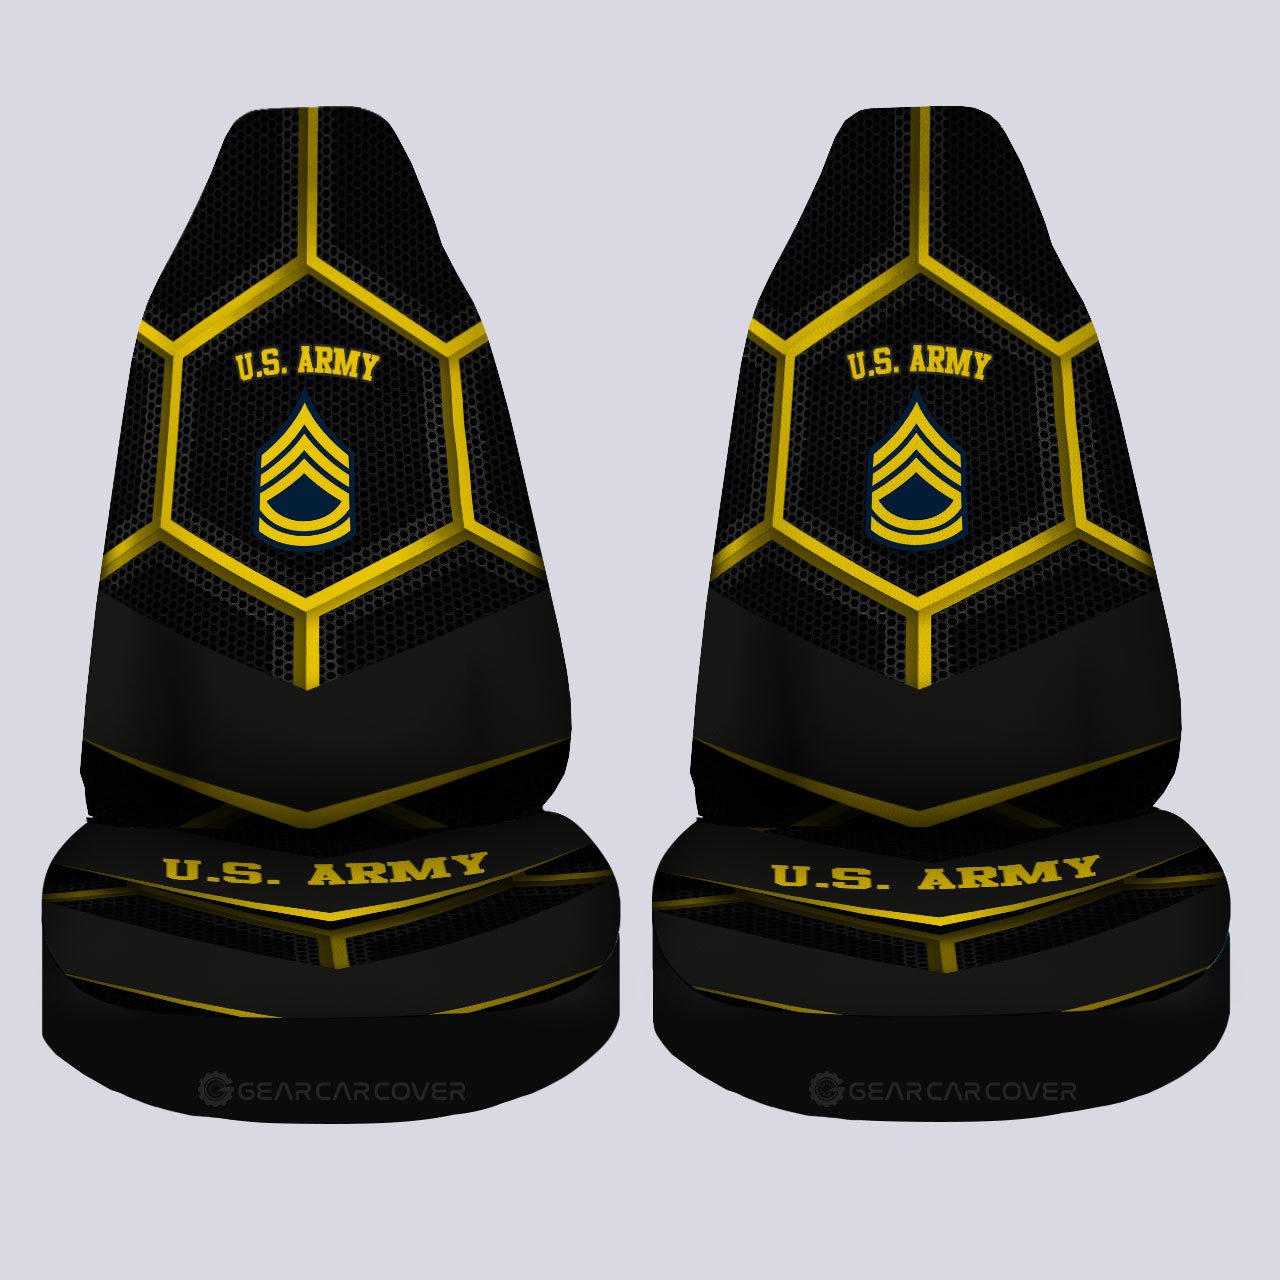 Personalized U.S Army Veterans Car Seat Covers Customized Name US Military Car Accessories - Gearcarcover - 5